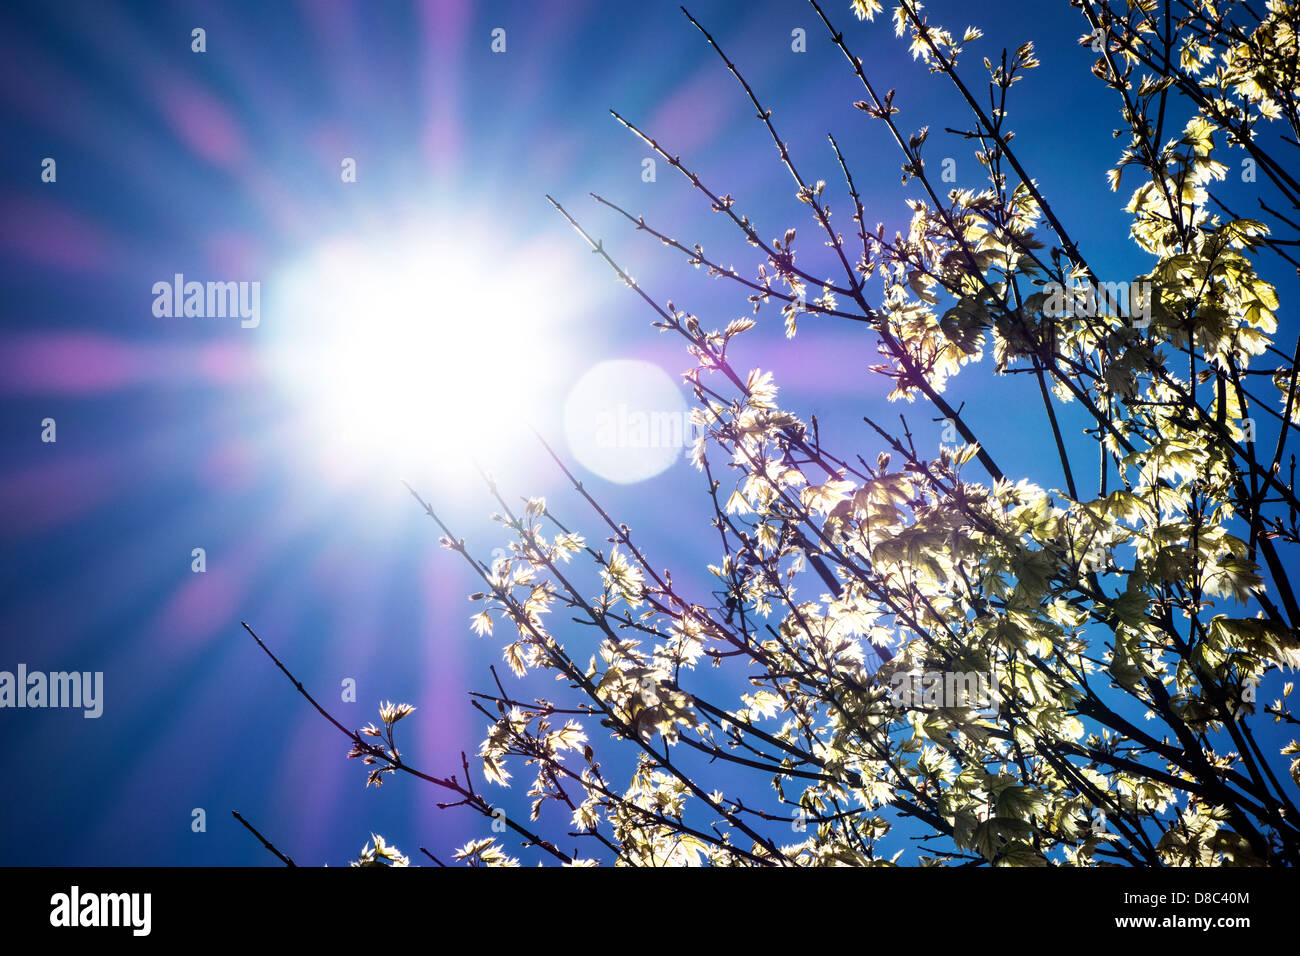 The sun in a clear blue sky seen through the young leaves of a maple tree Stock Photo